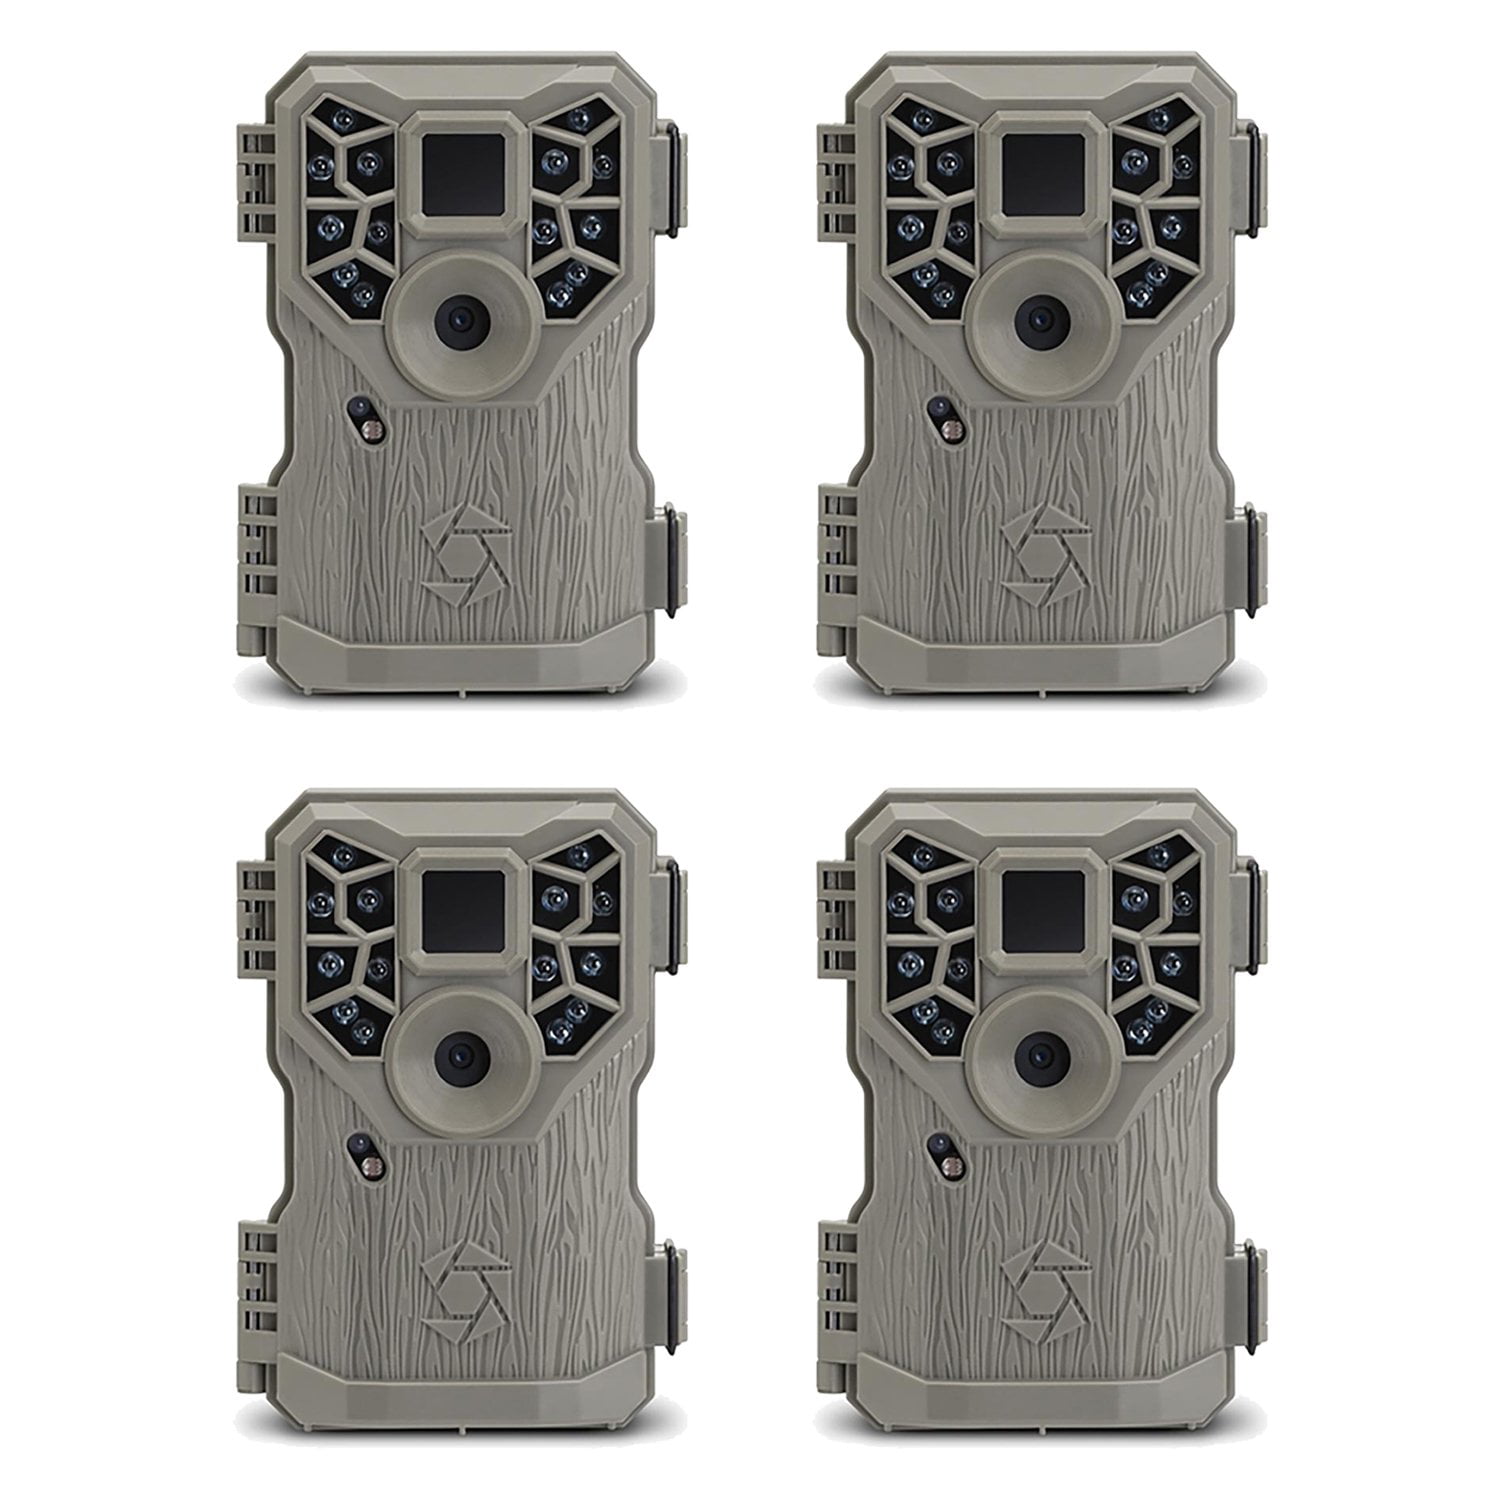 2 Pack Stealth Cam 8MP 14 IR Emitter Game Trail Camera with Video and SD Card 